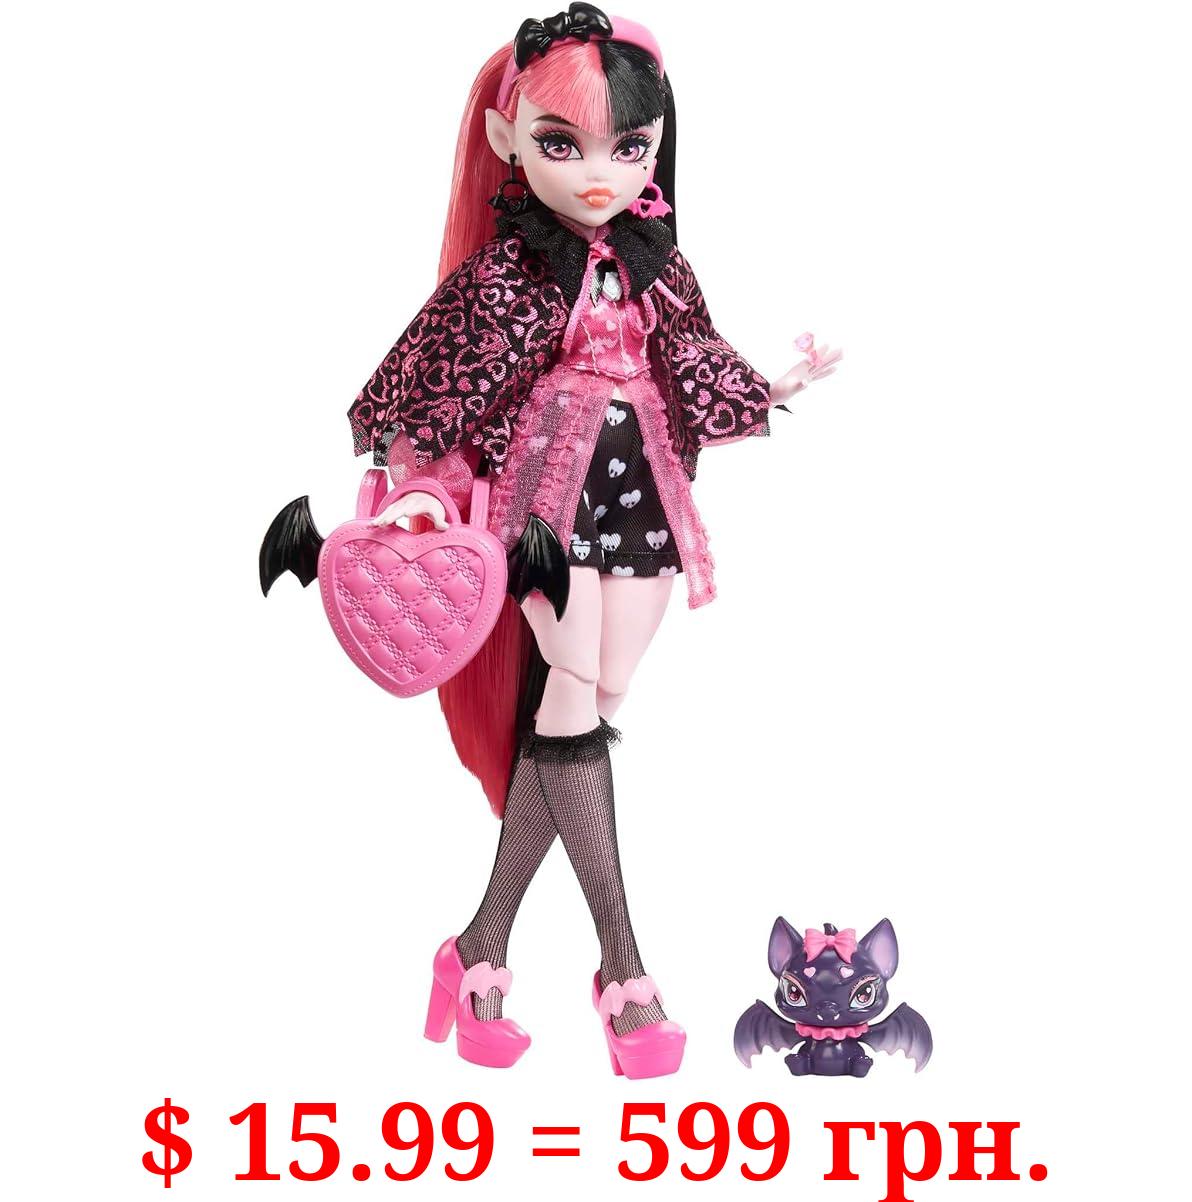 Monster High Draculaura Fashion Doll with Pink & Black Hair, Signature Look, Accessories & Pet Bat